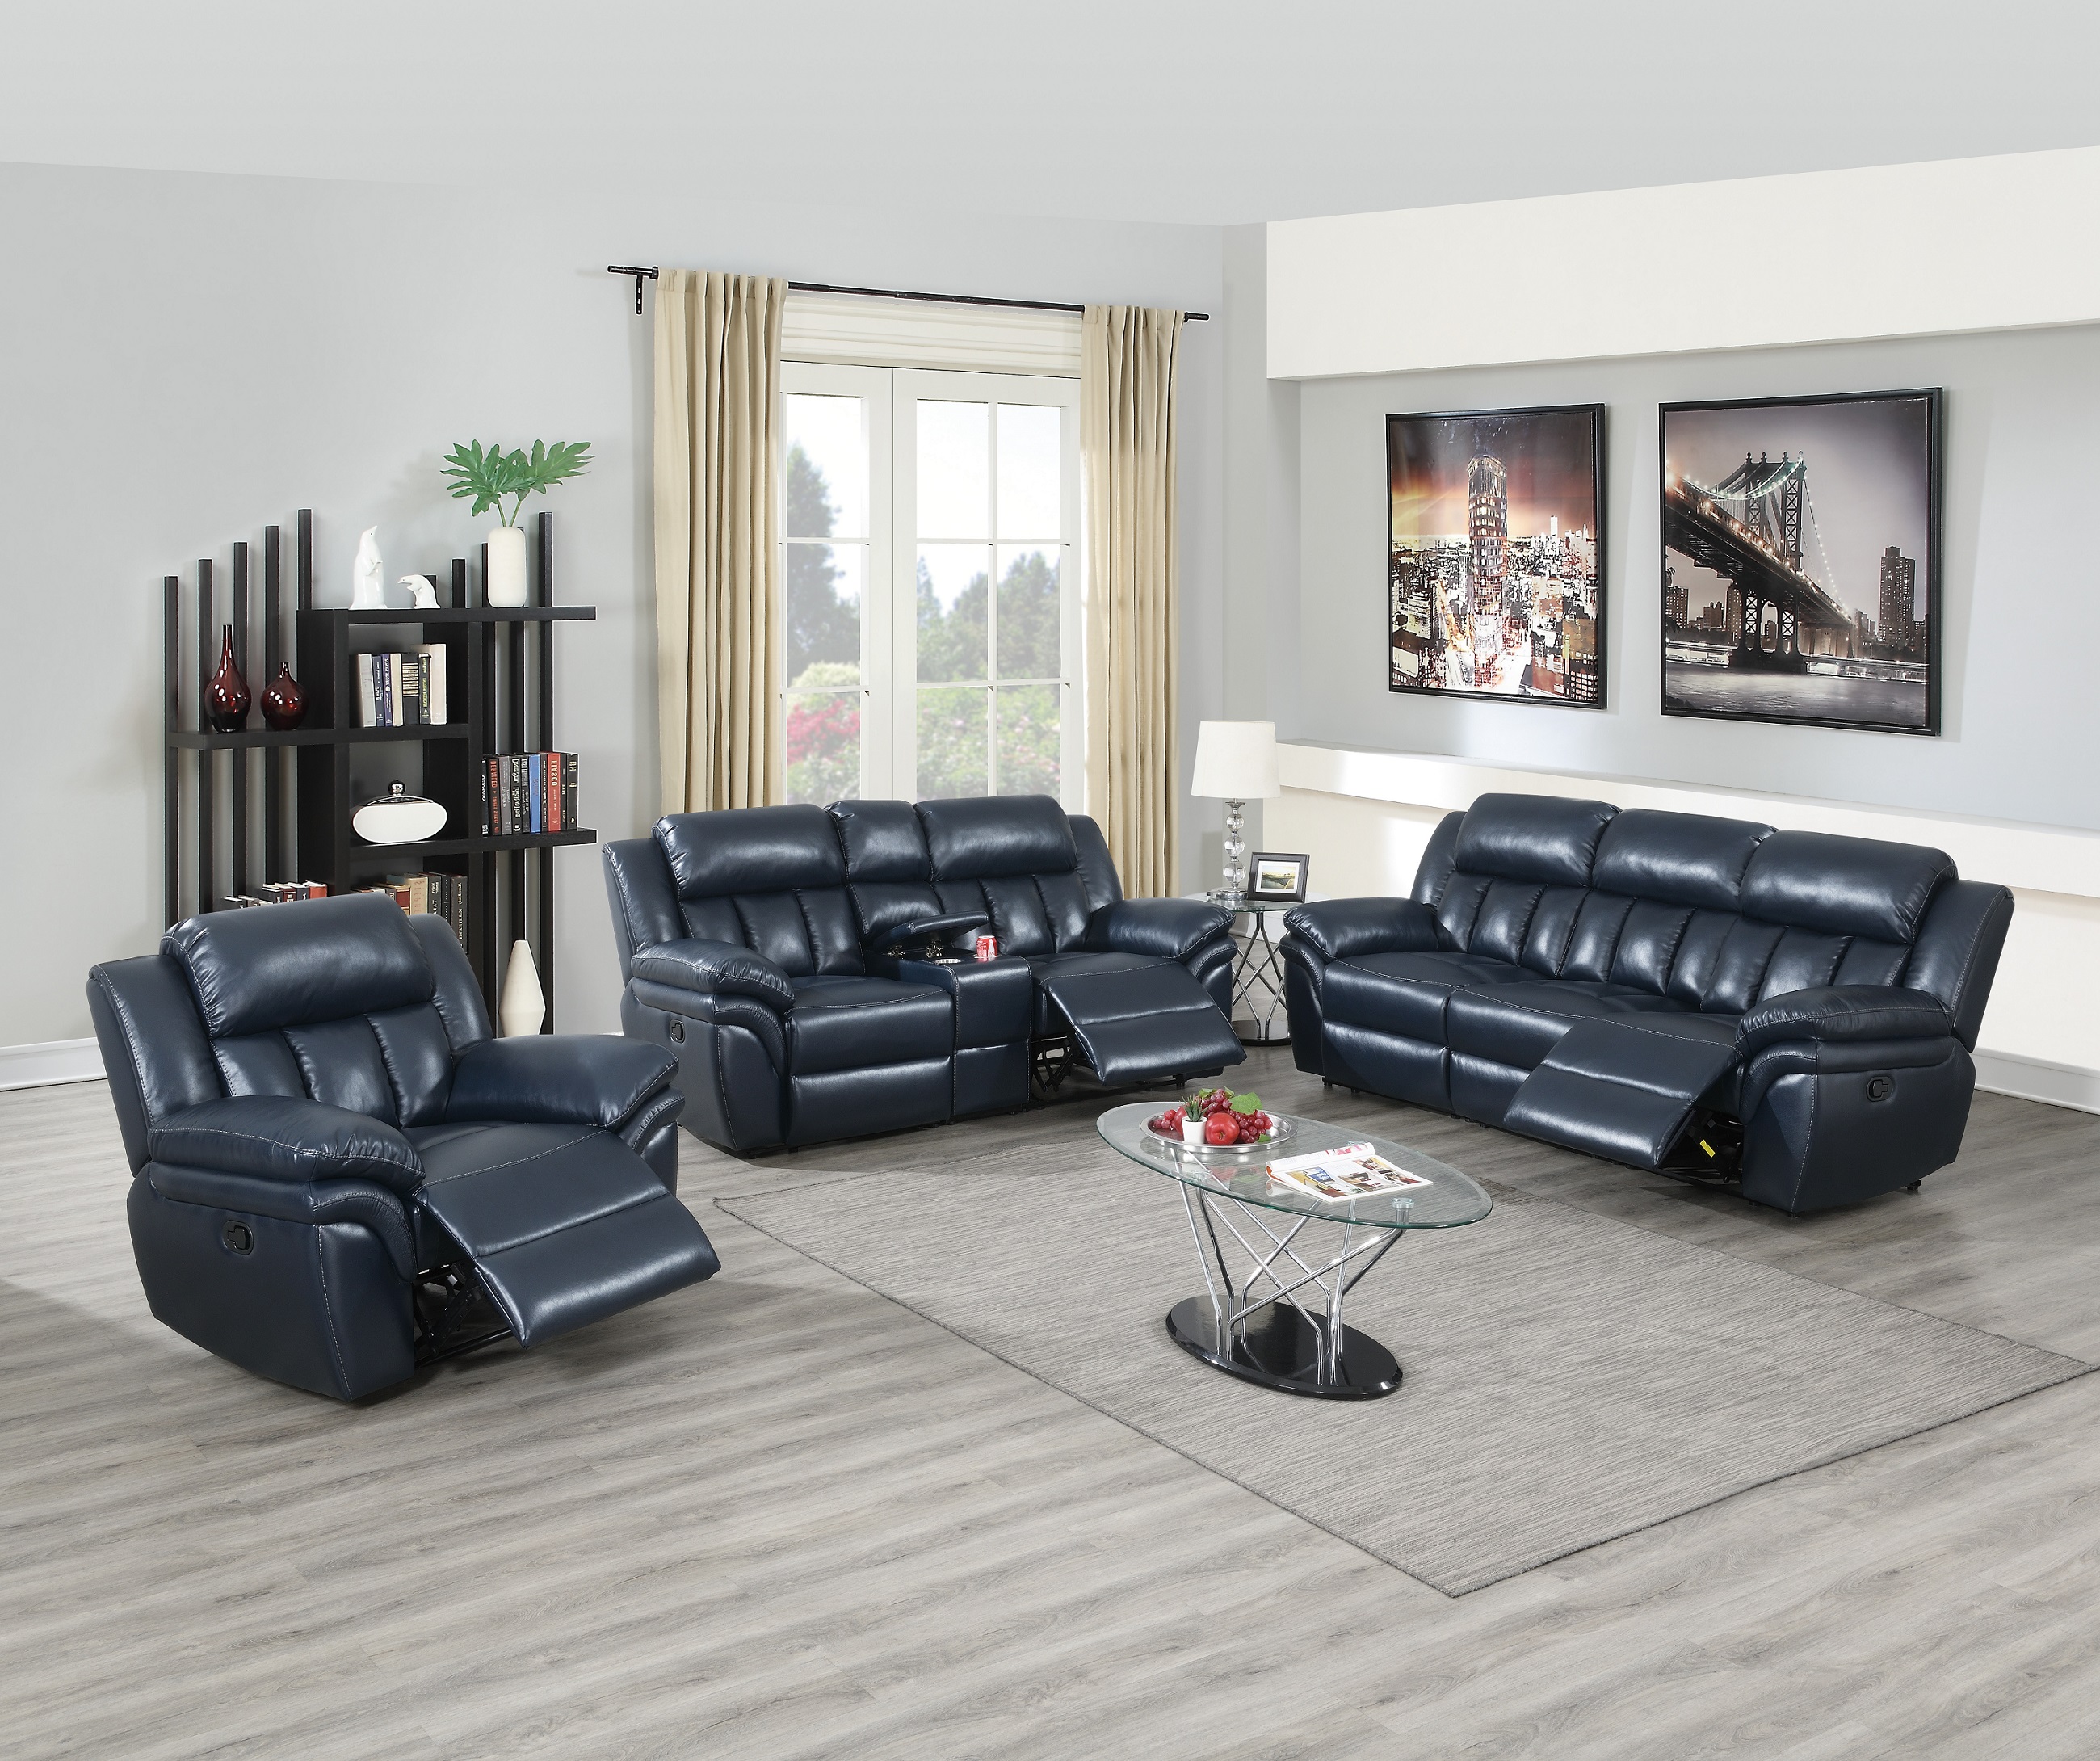 Recliner Furniture Couch, Navy Blue Leather Furniture Set